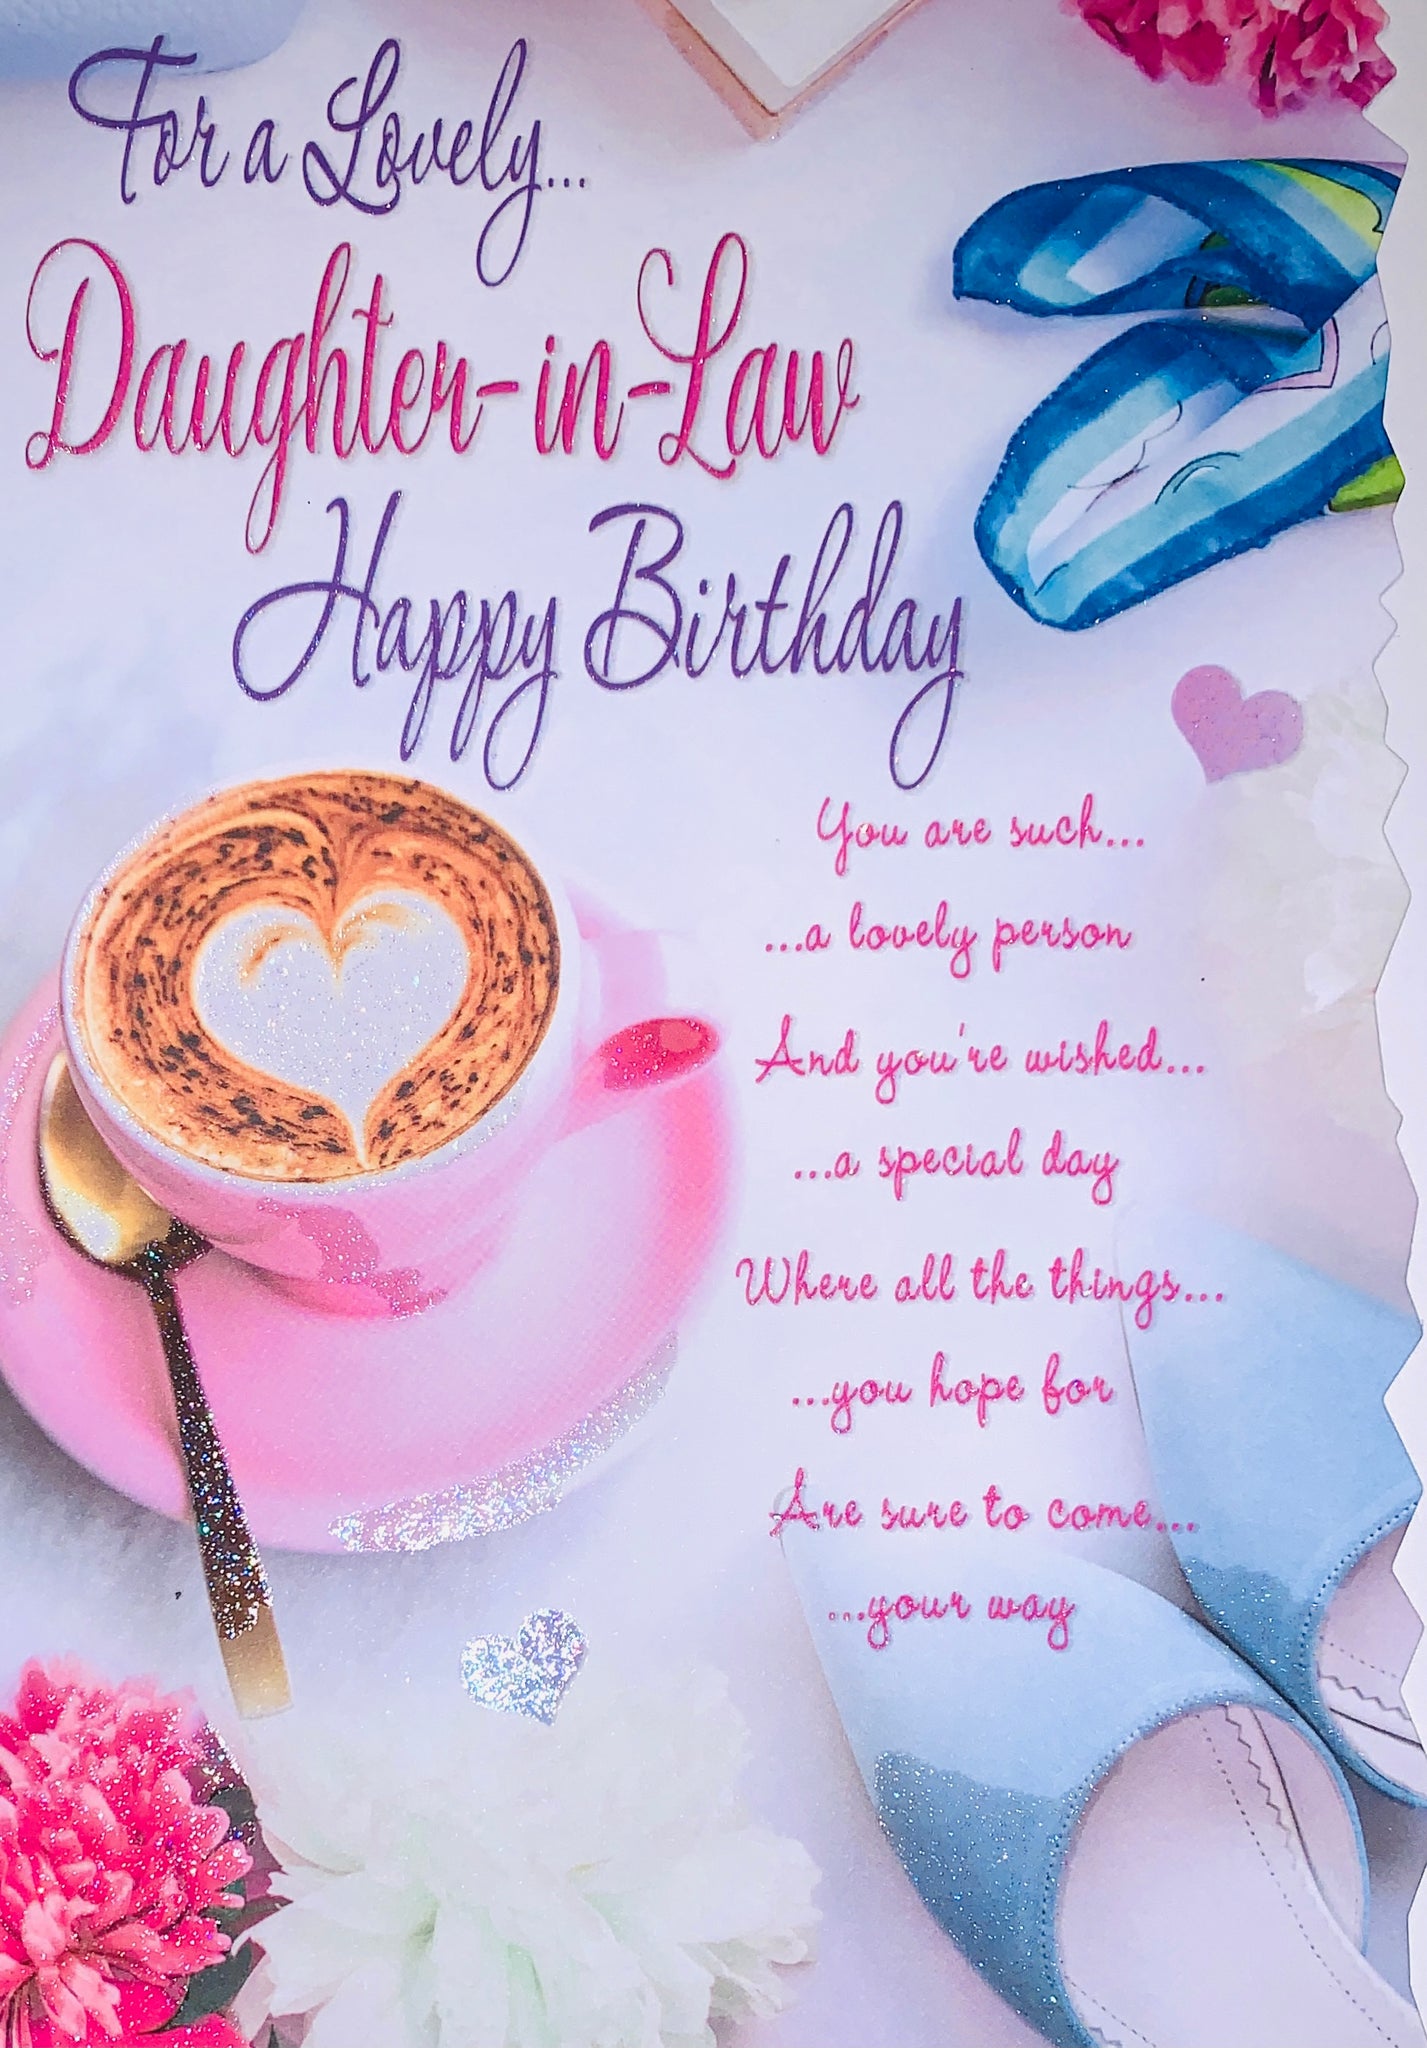 Daughter-in-law birthday card - long verse